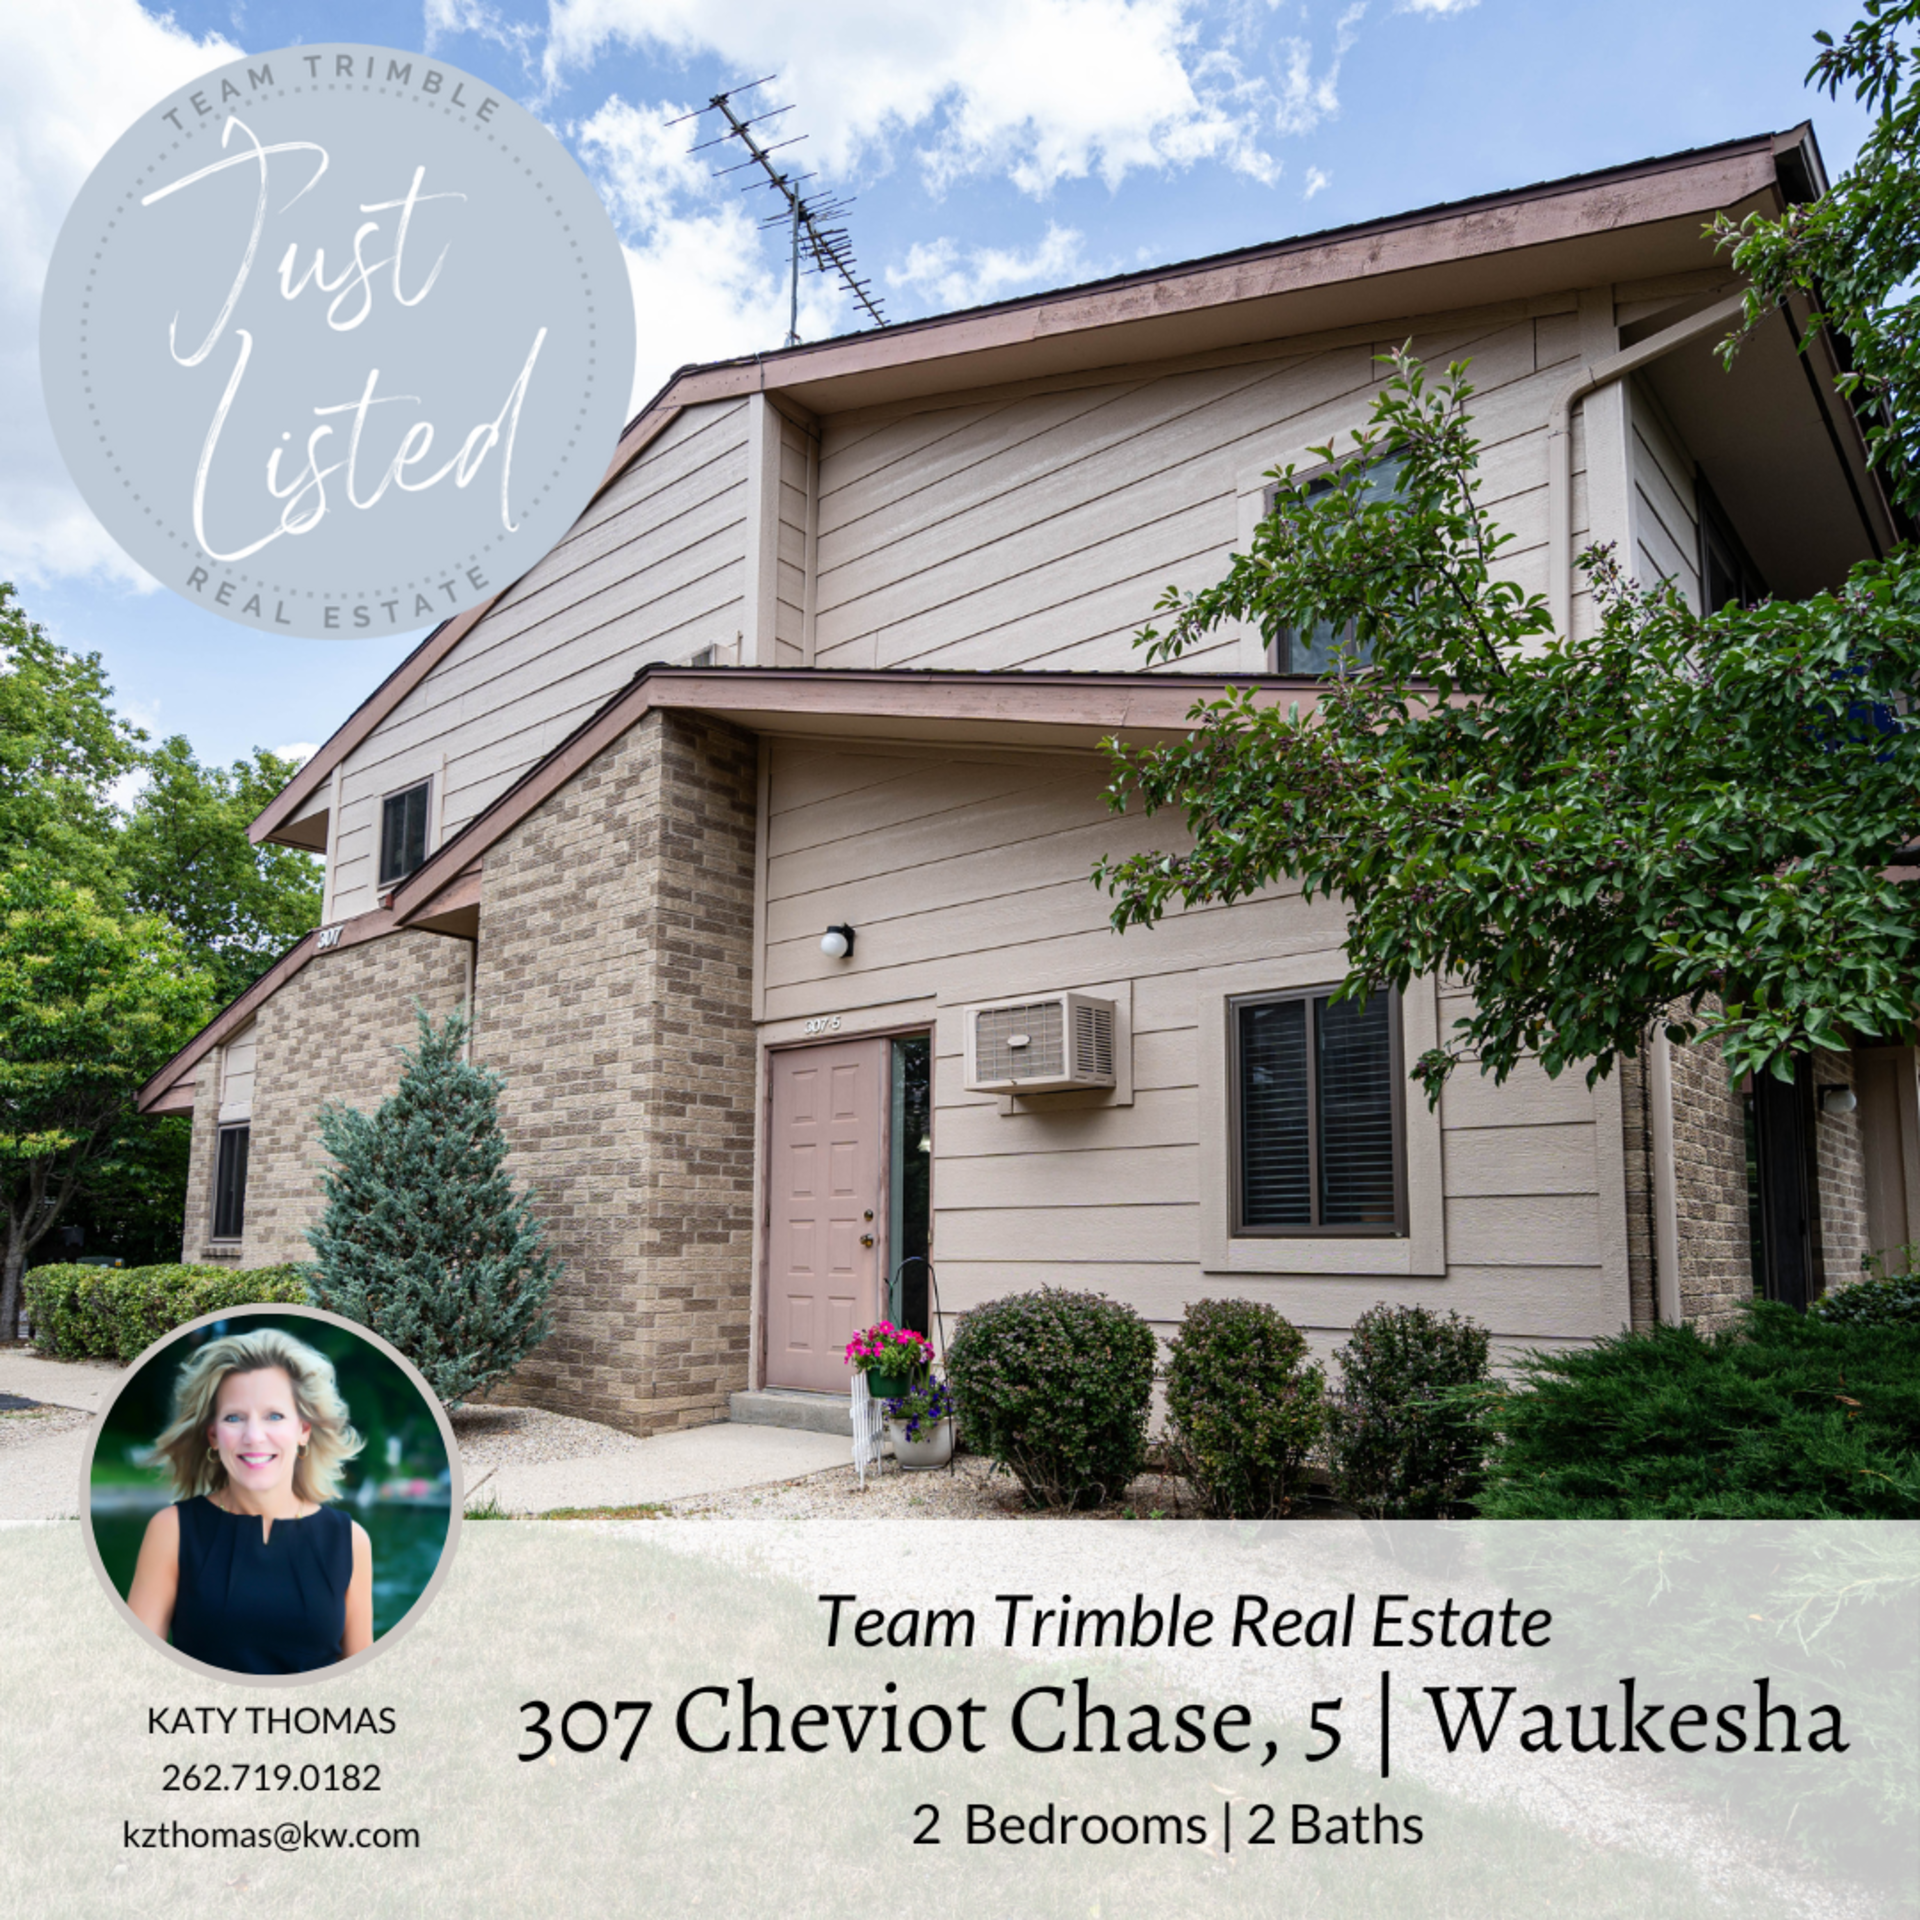 Just Listed. 307 Cheviot Chase 5 Waukesha WI 53186